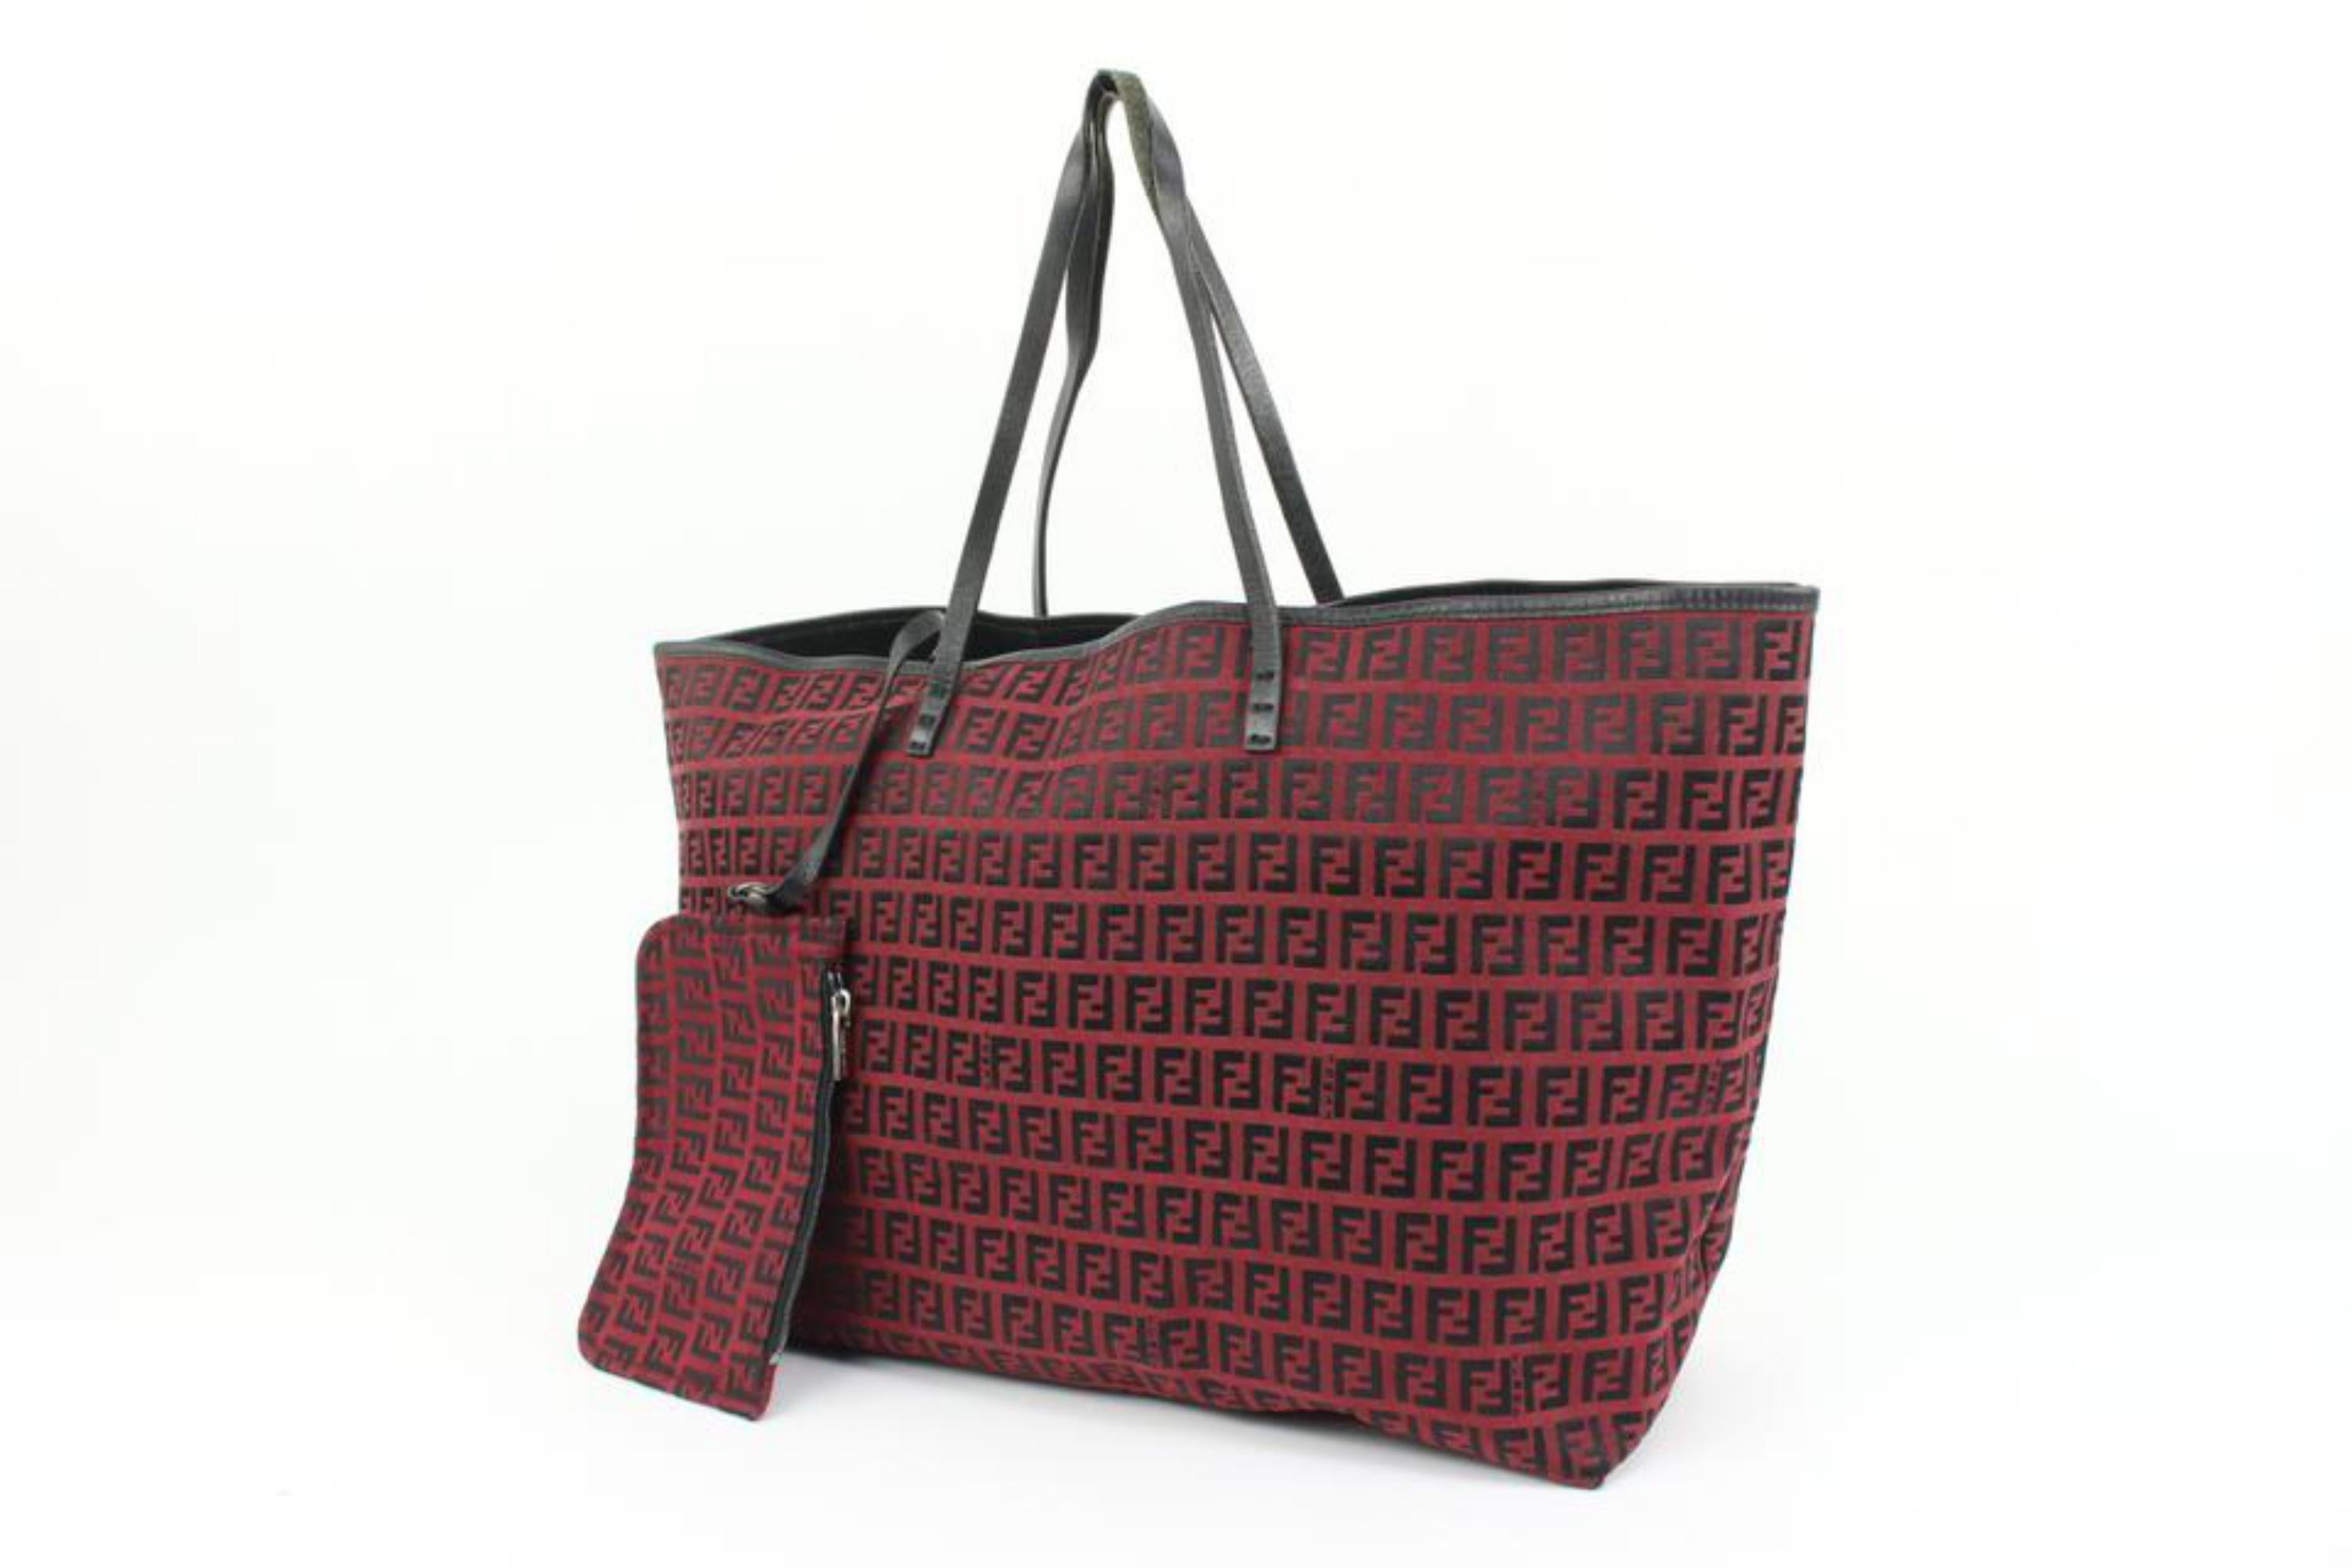 Fendi Dark Red Monogram FF Zucca Roll Tote with Pouch 64f322s
Date Code/Serial Number: 2111-8BH061-029
Made In: Italy
Measurements: Length:  18